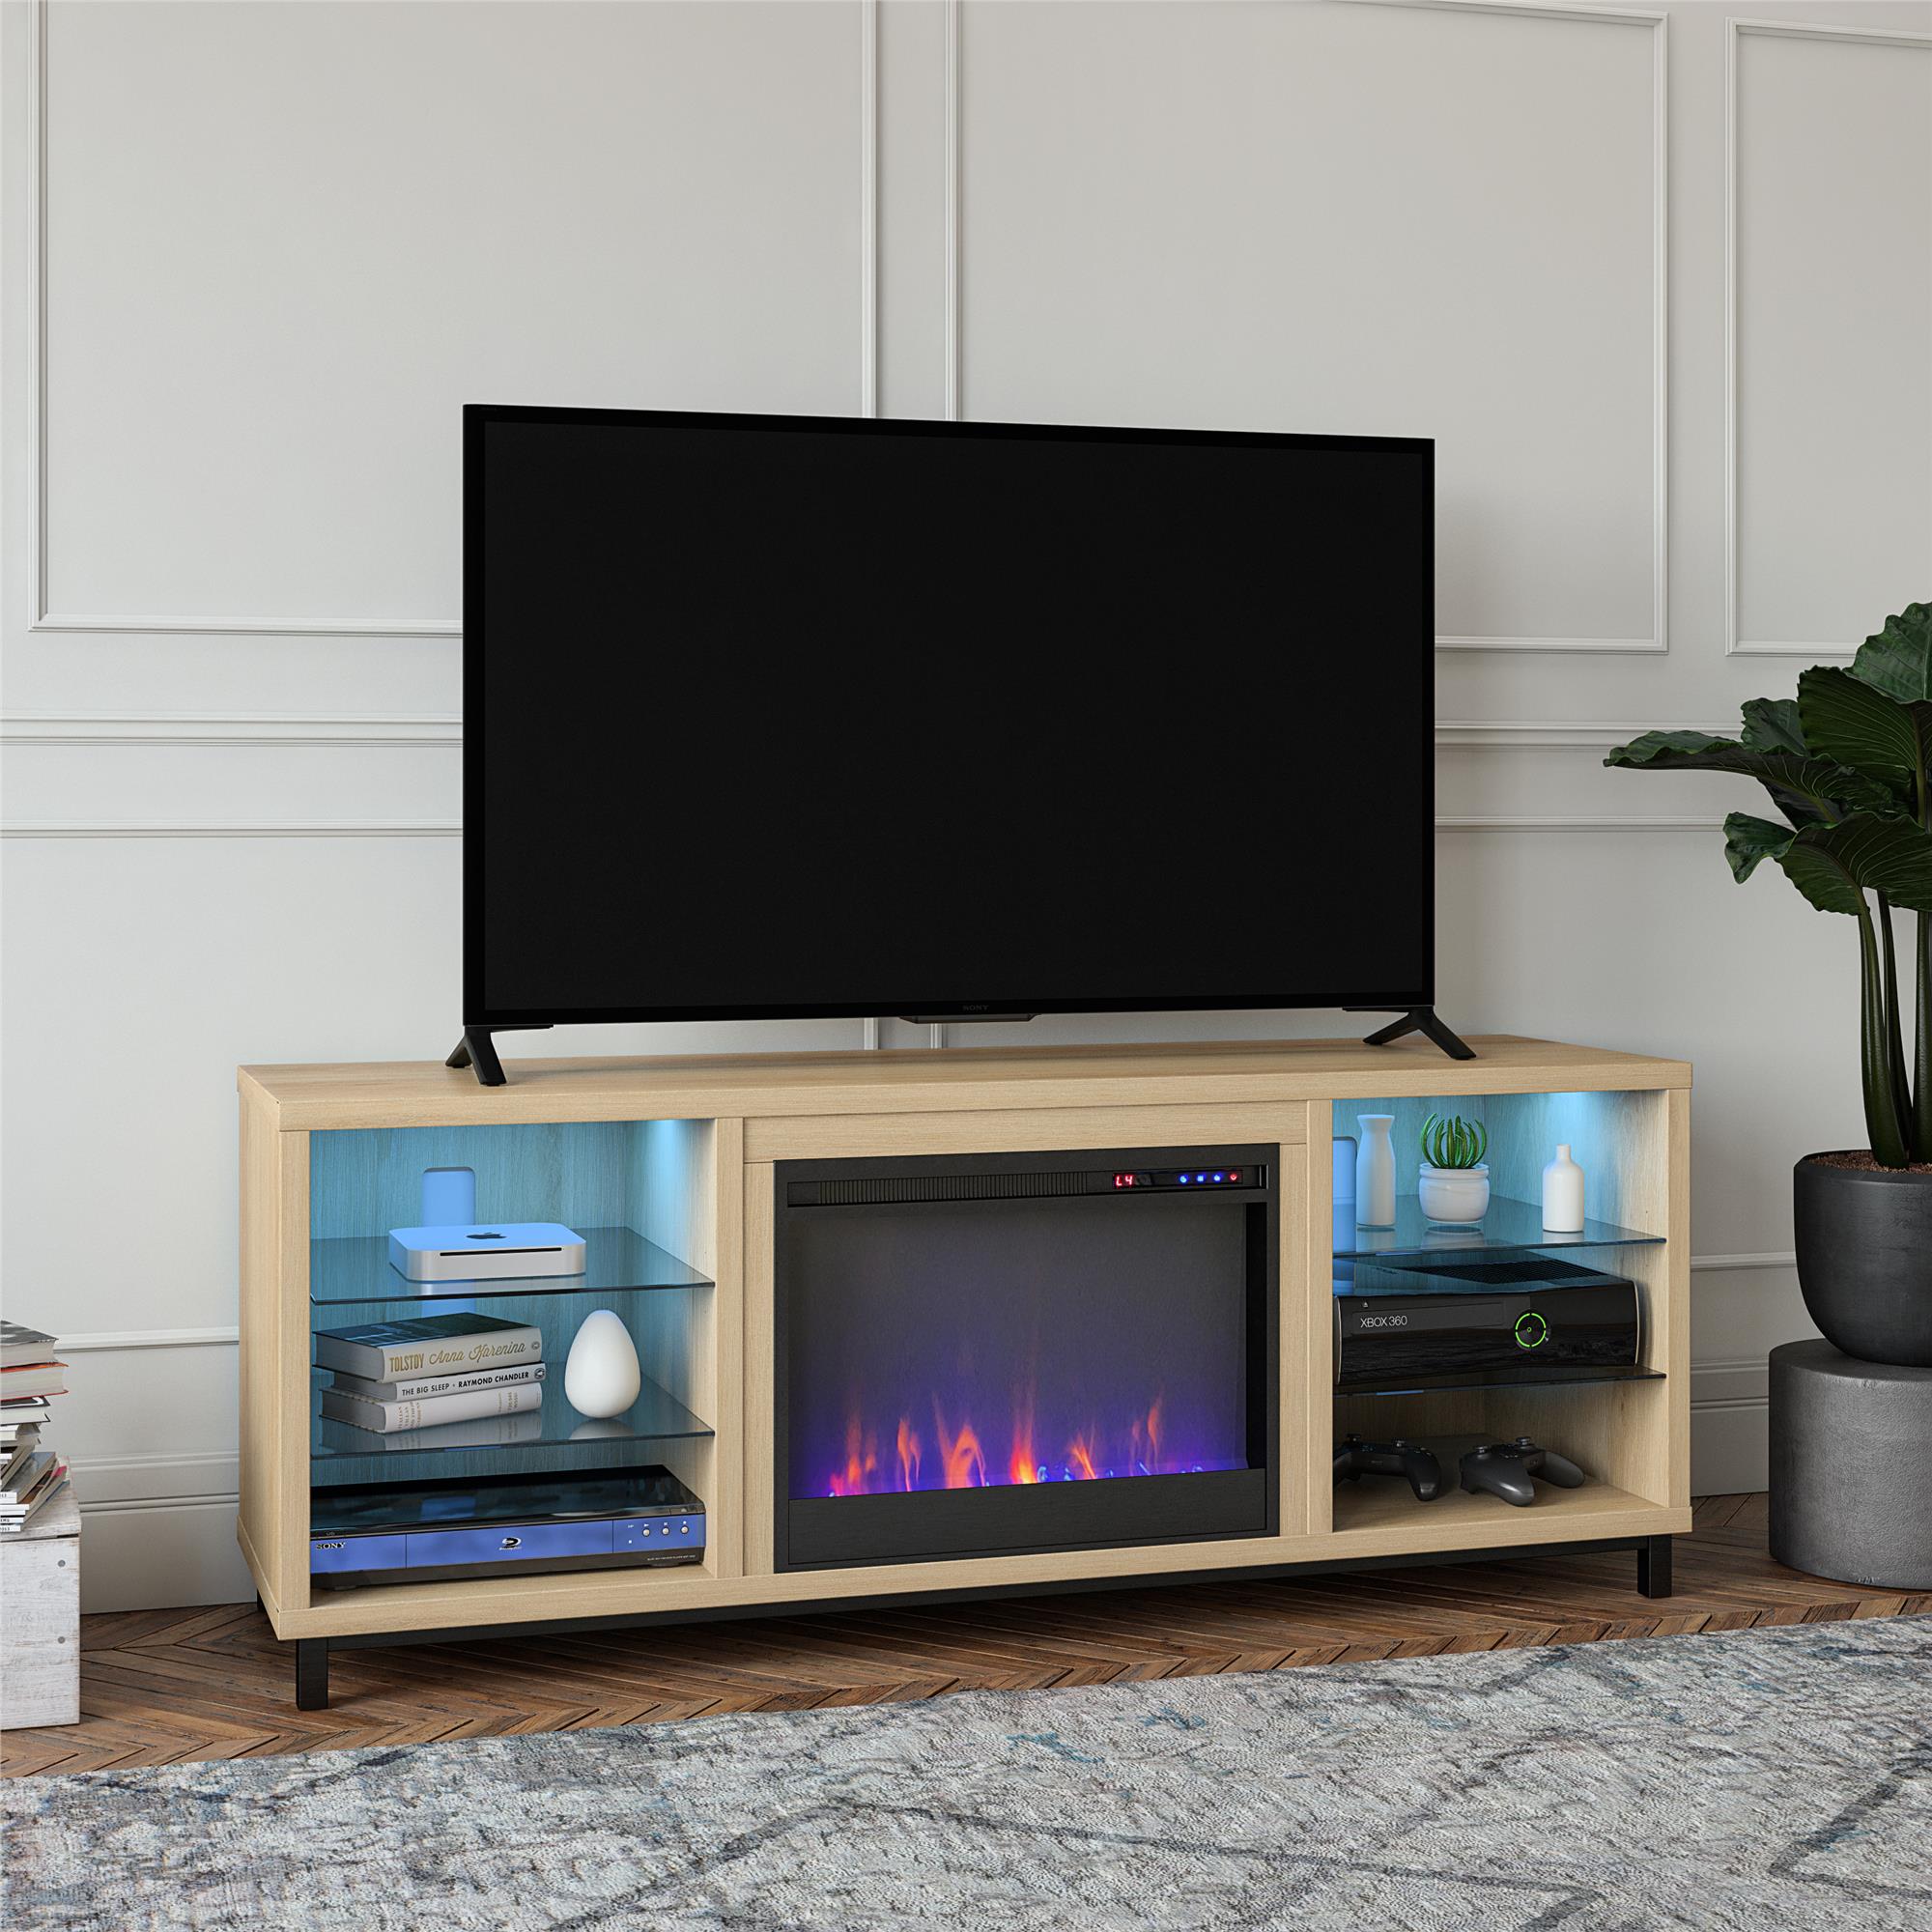 Ameriwood Home Lumina Deluxe Fireplace TV Stand for TVs up to 70", Blonde Oak - image 2 of 20